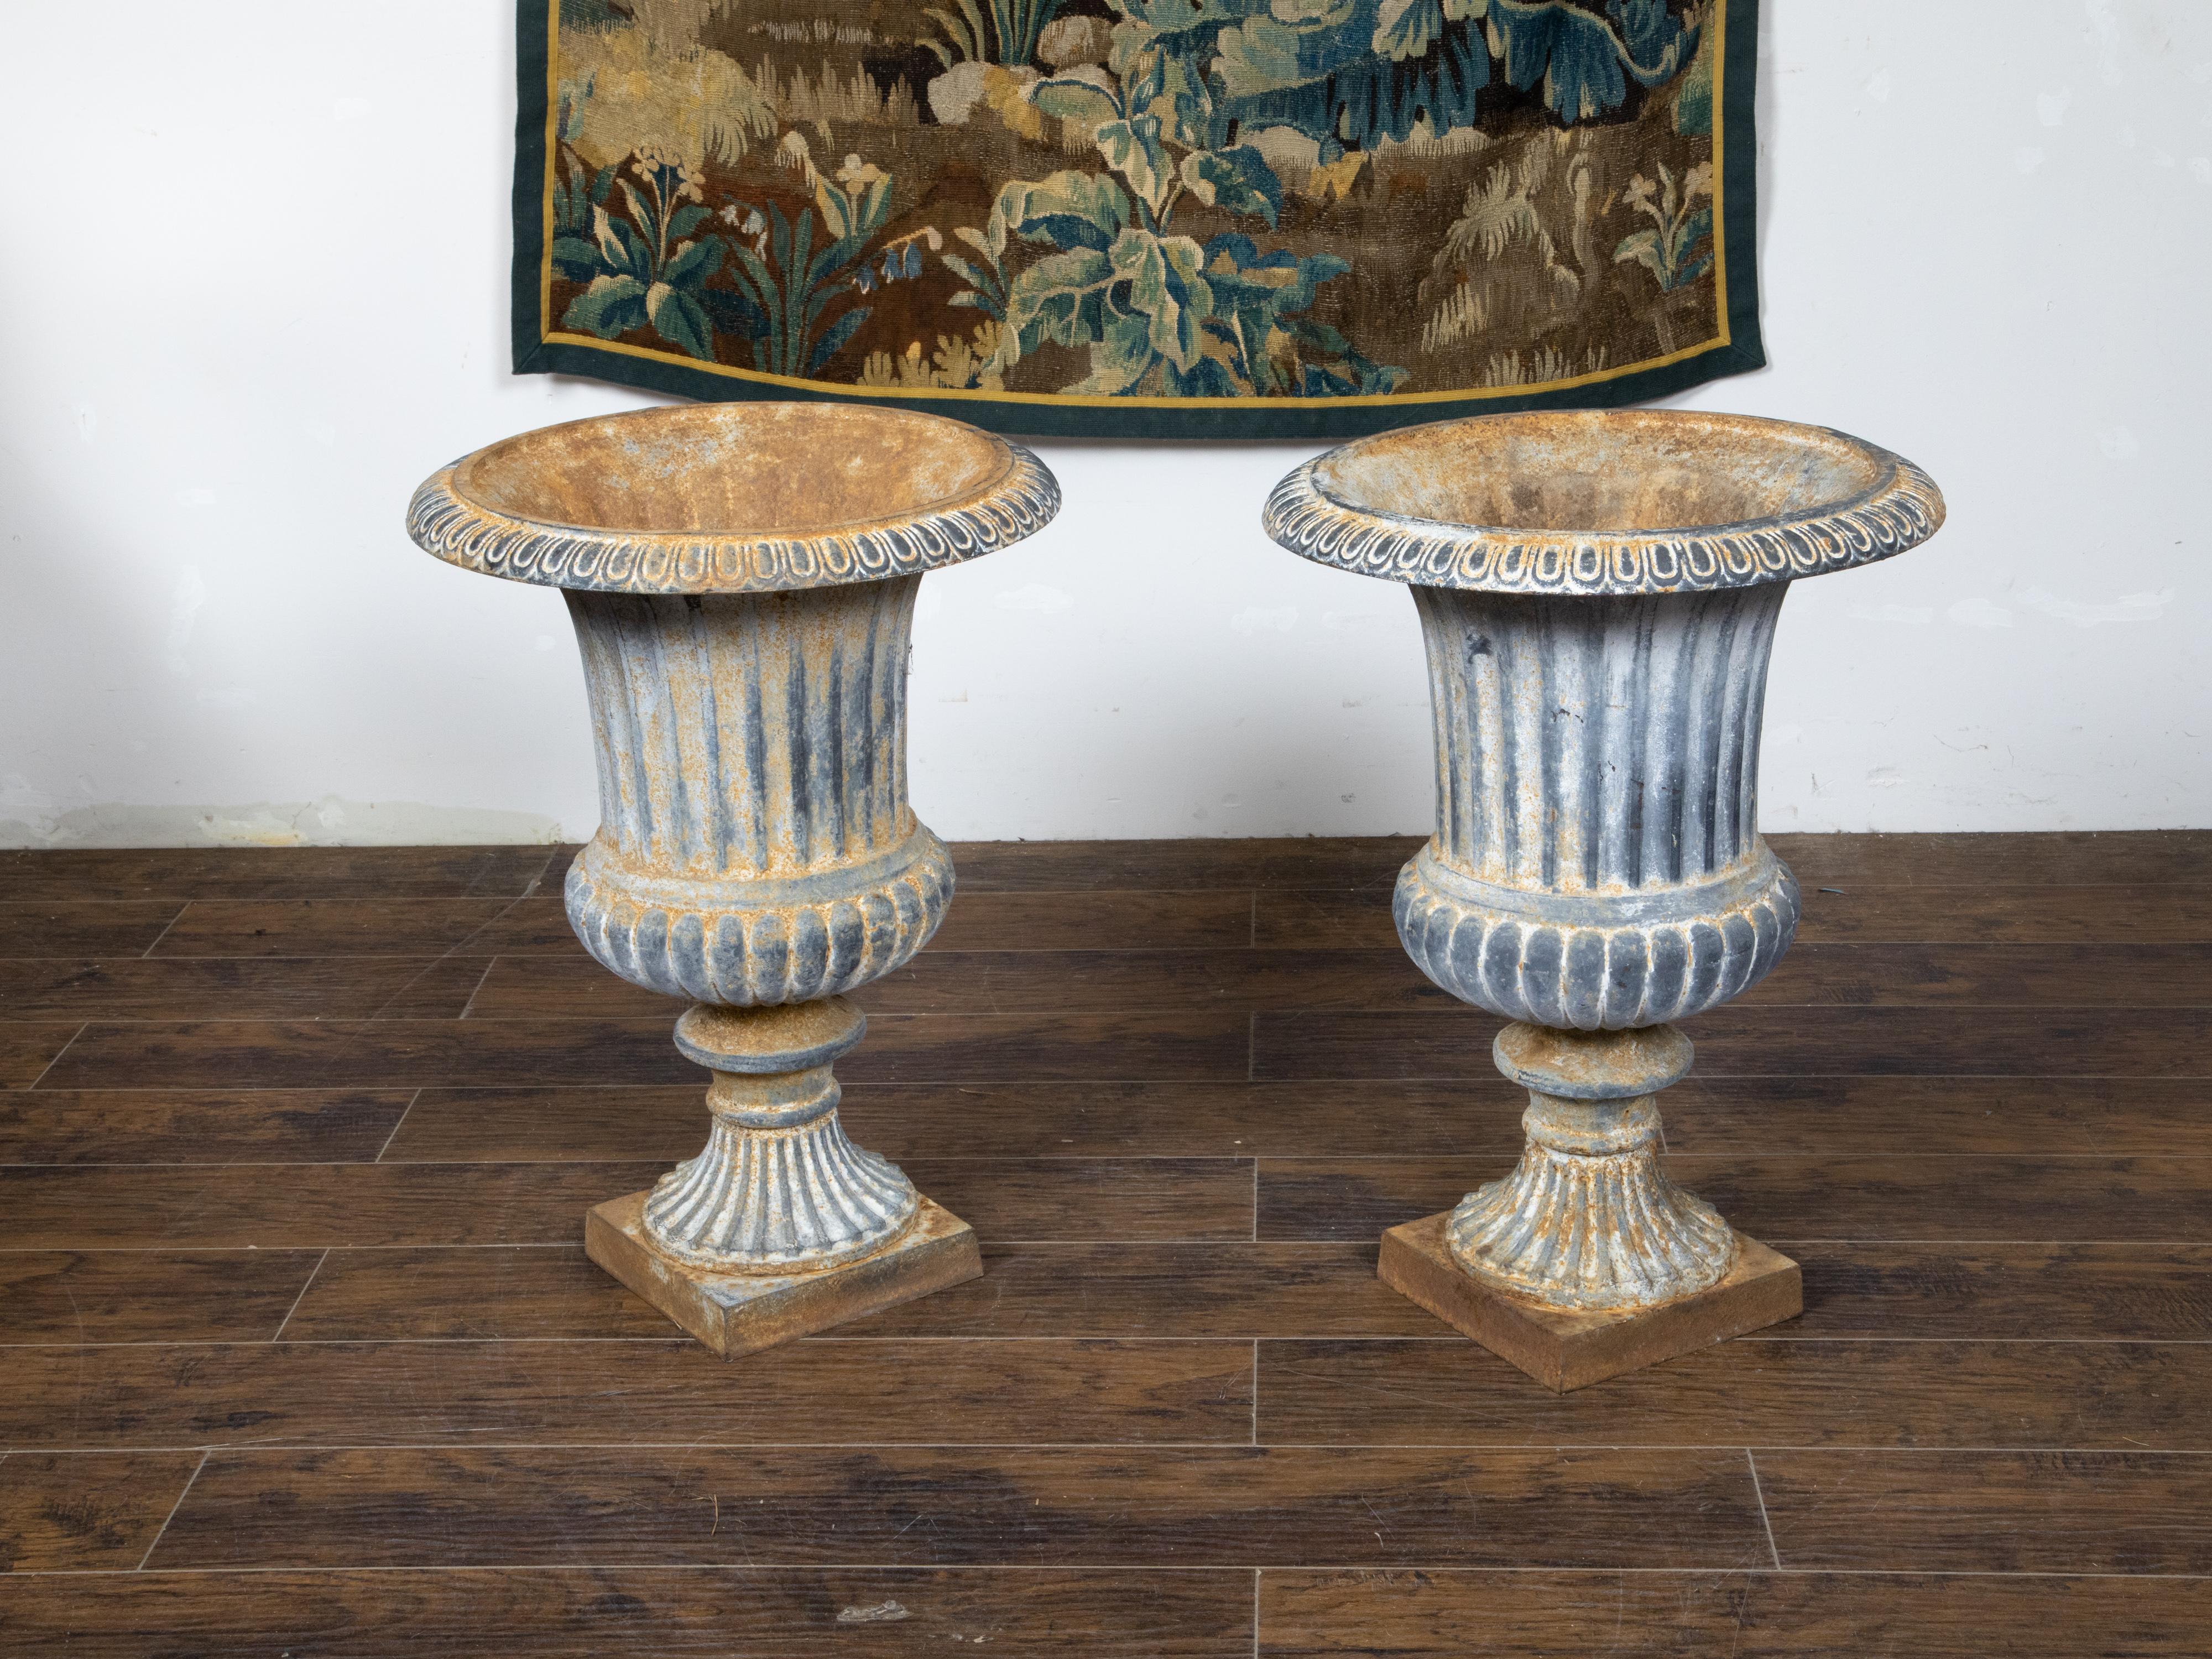 20th Century Pair of Turn of the Century French Medici Urn Cast Iron Planters with Patina For Sale